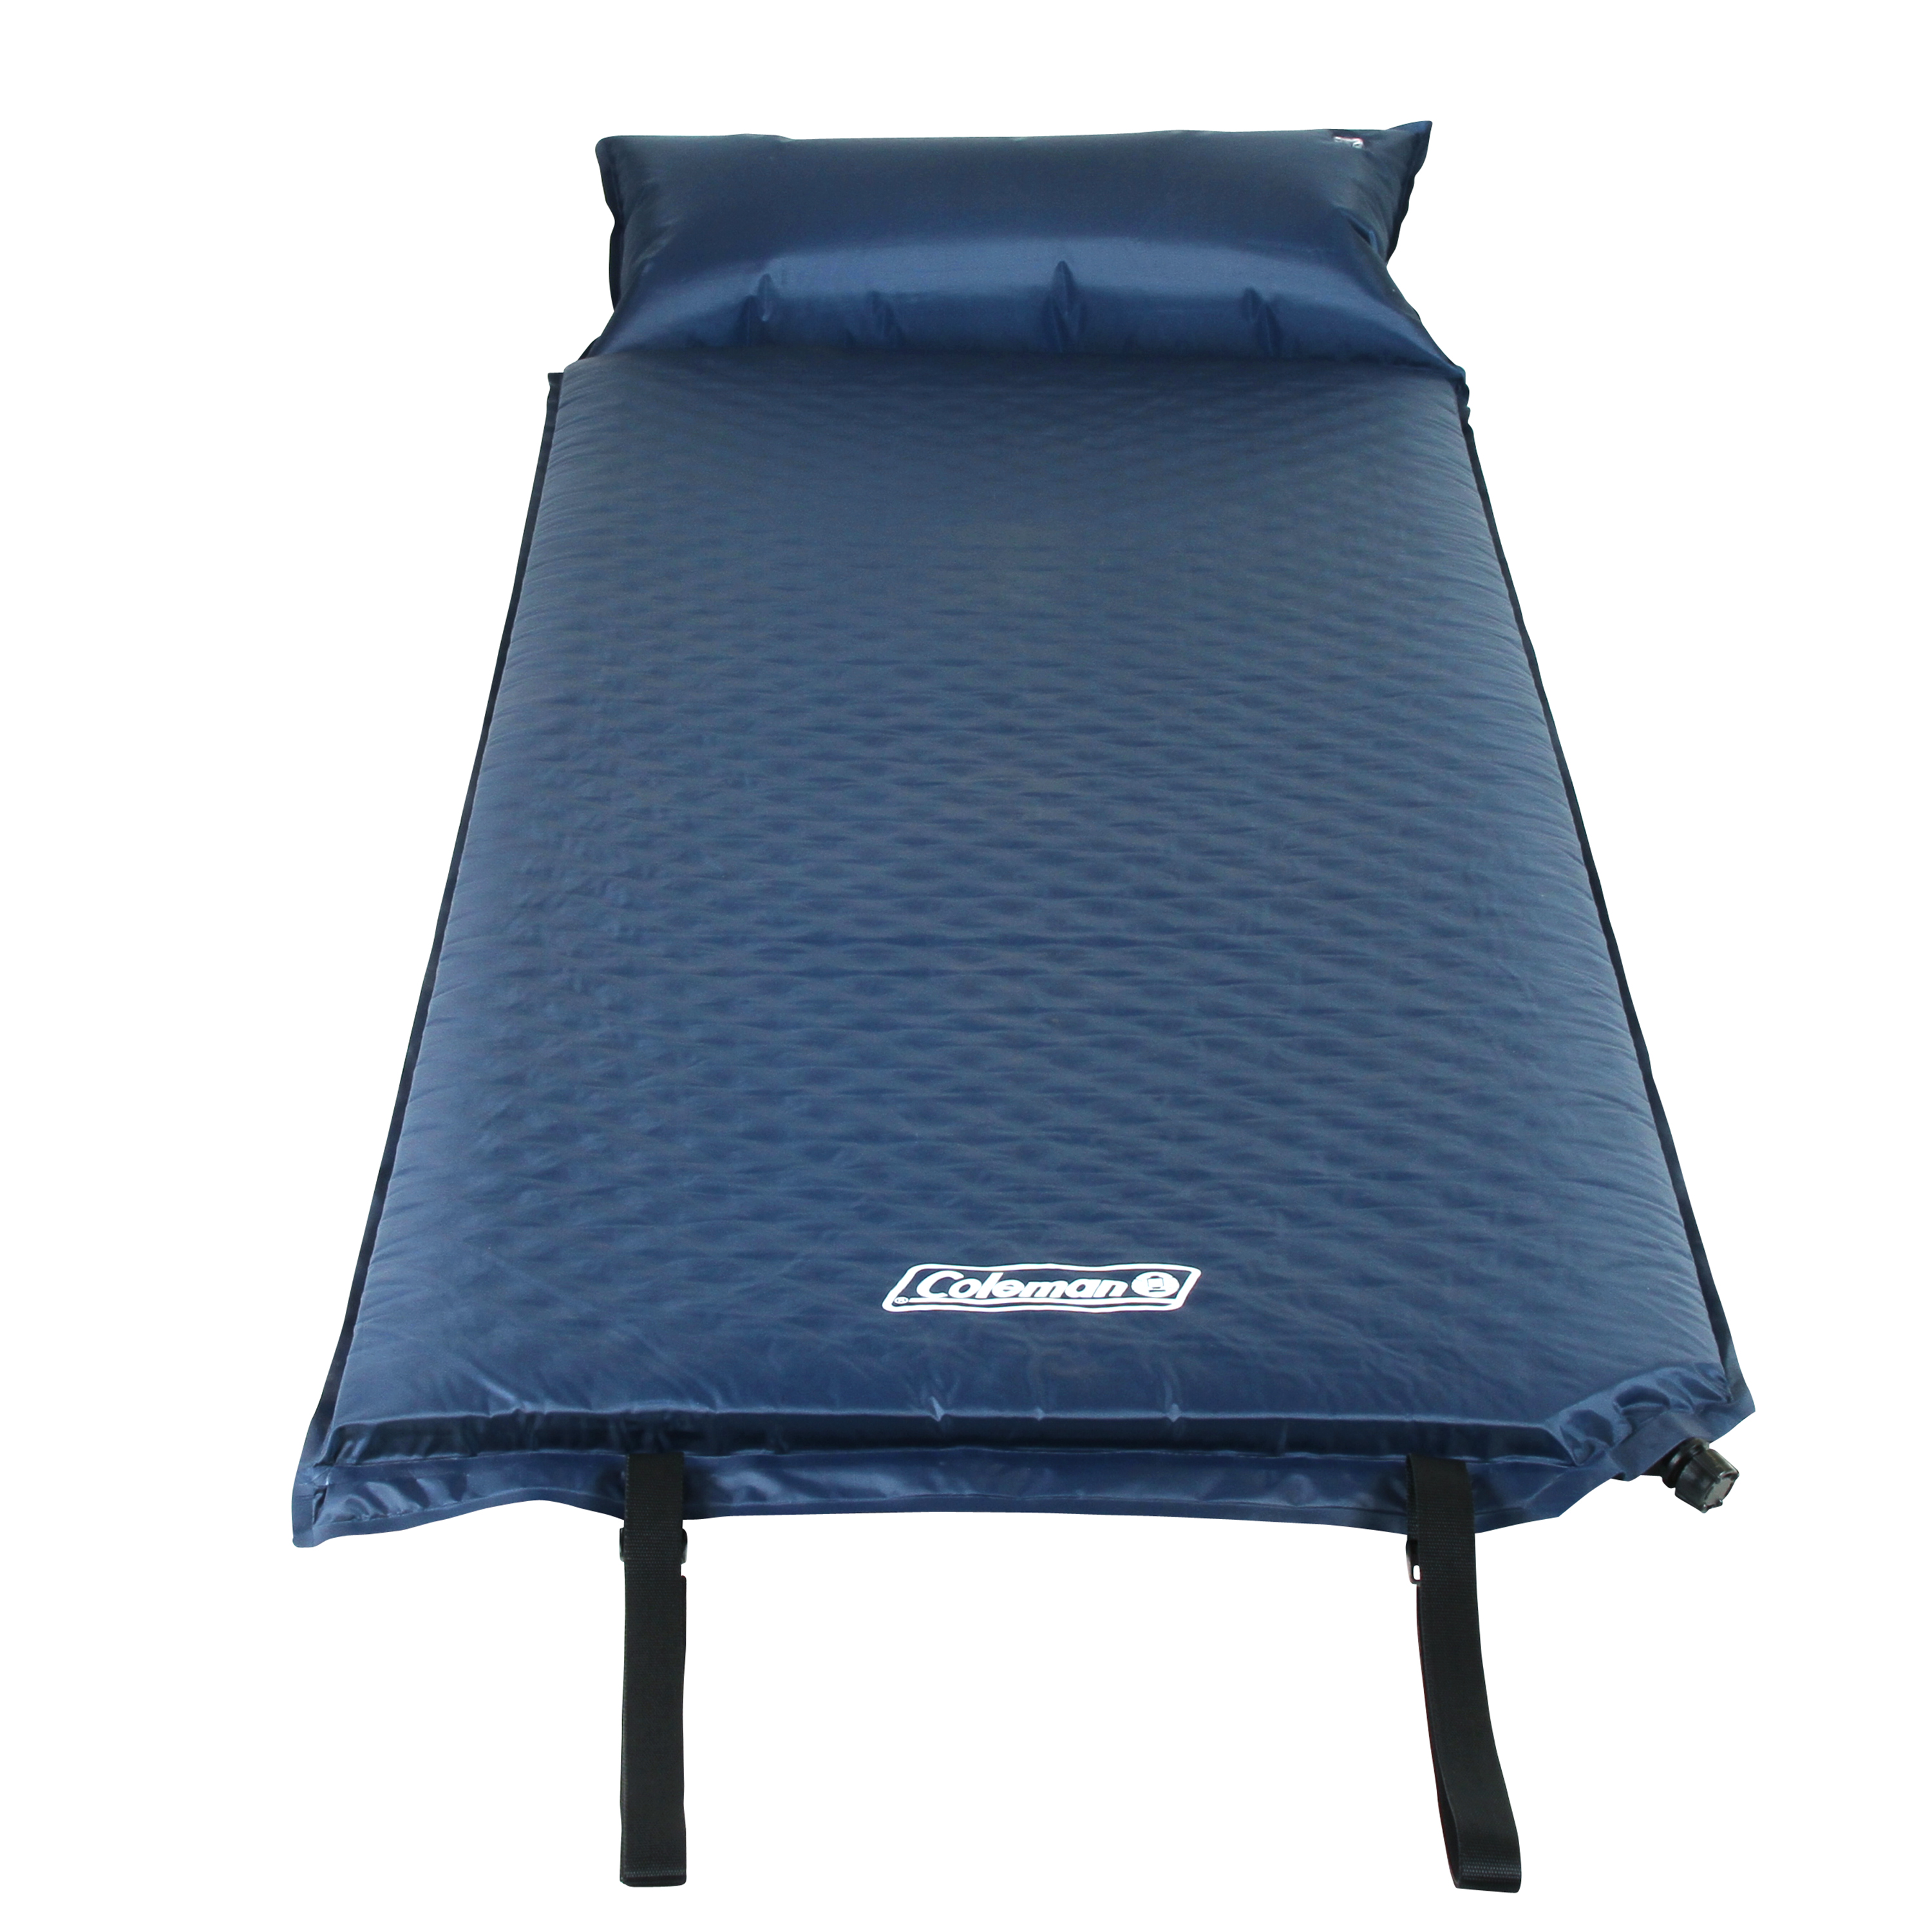 Coleman Self-Inflating Sleeping Camp Pad with Pillow, 76" x 25" - image 2 of 6